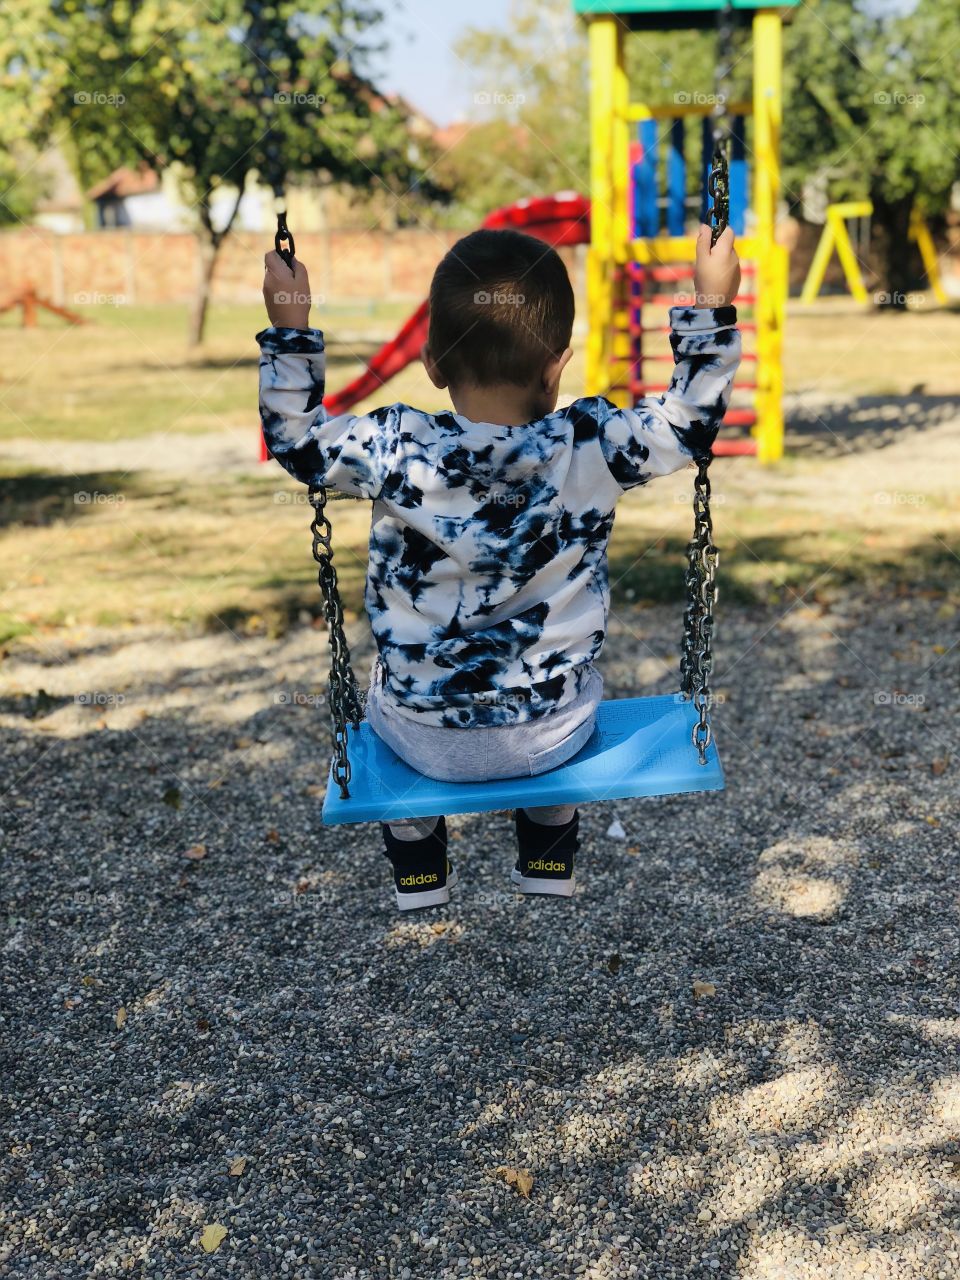 Toddler on the swing